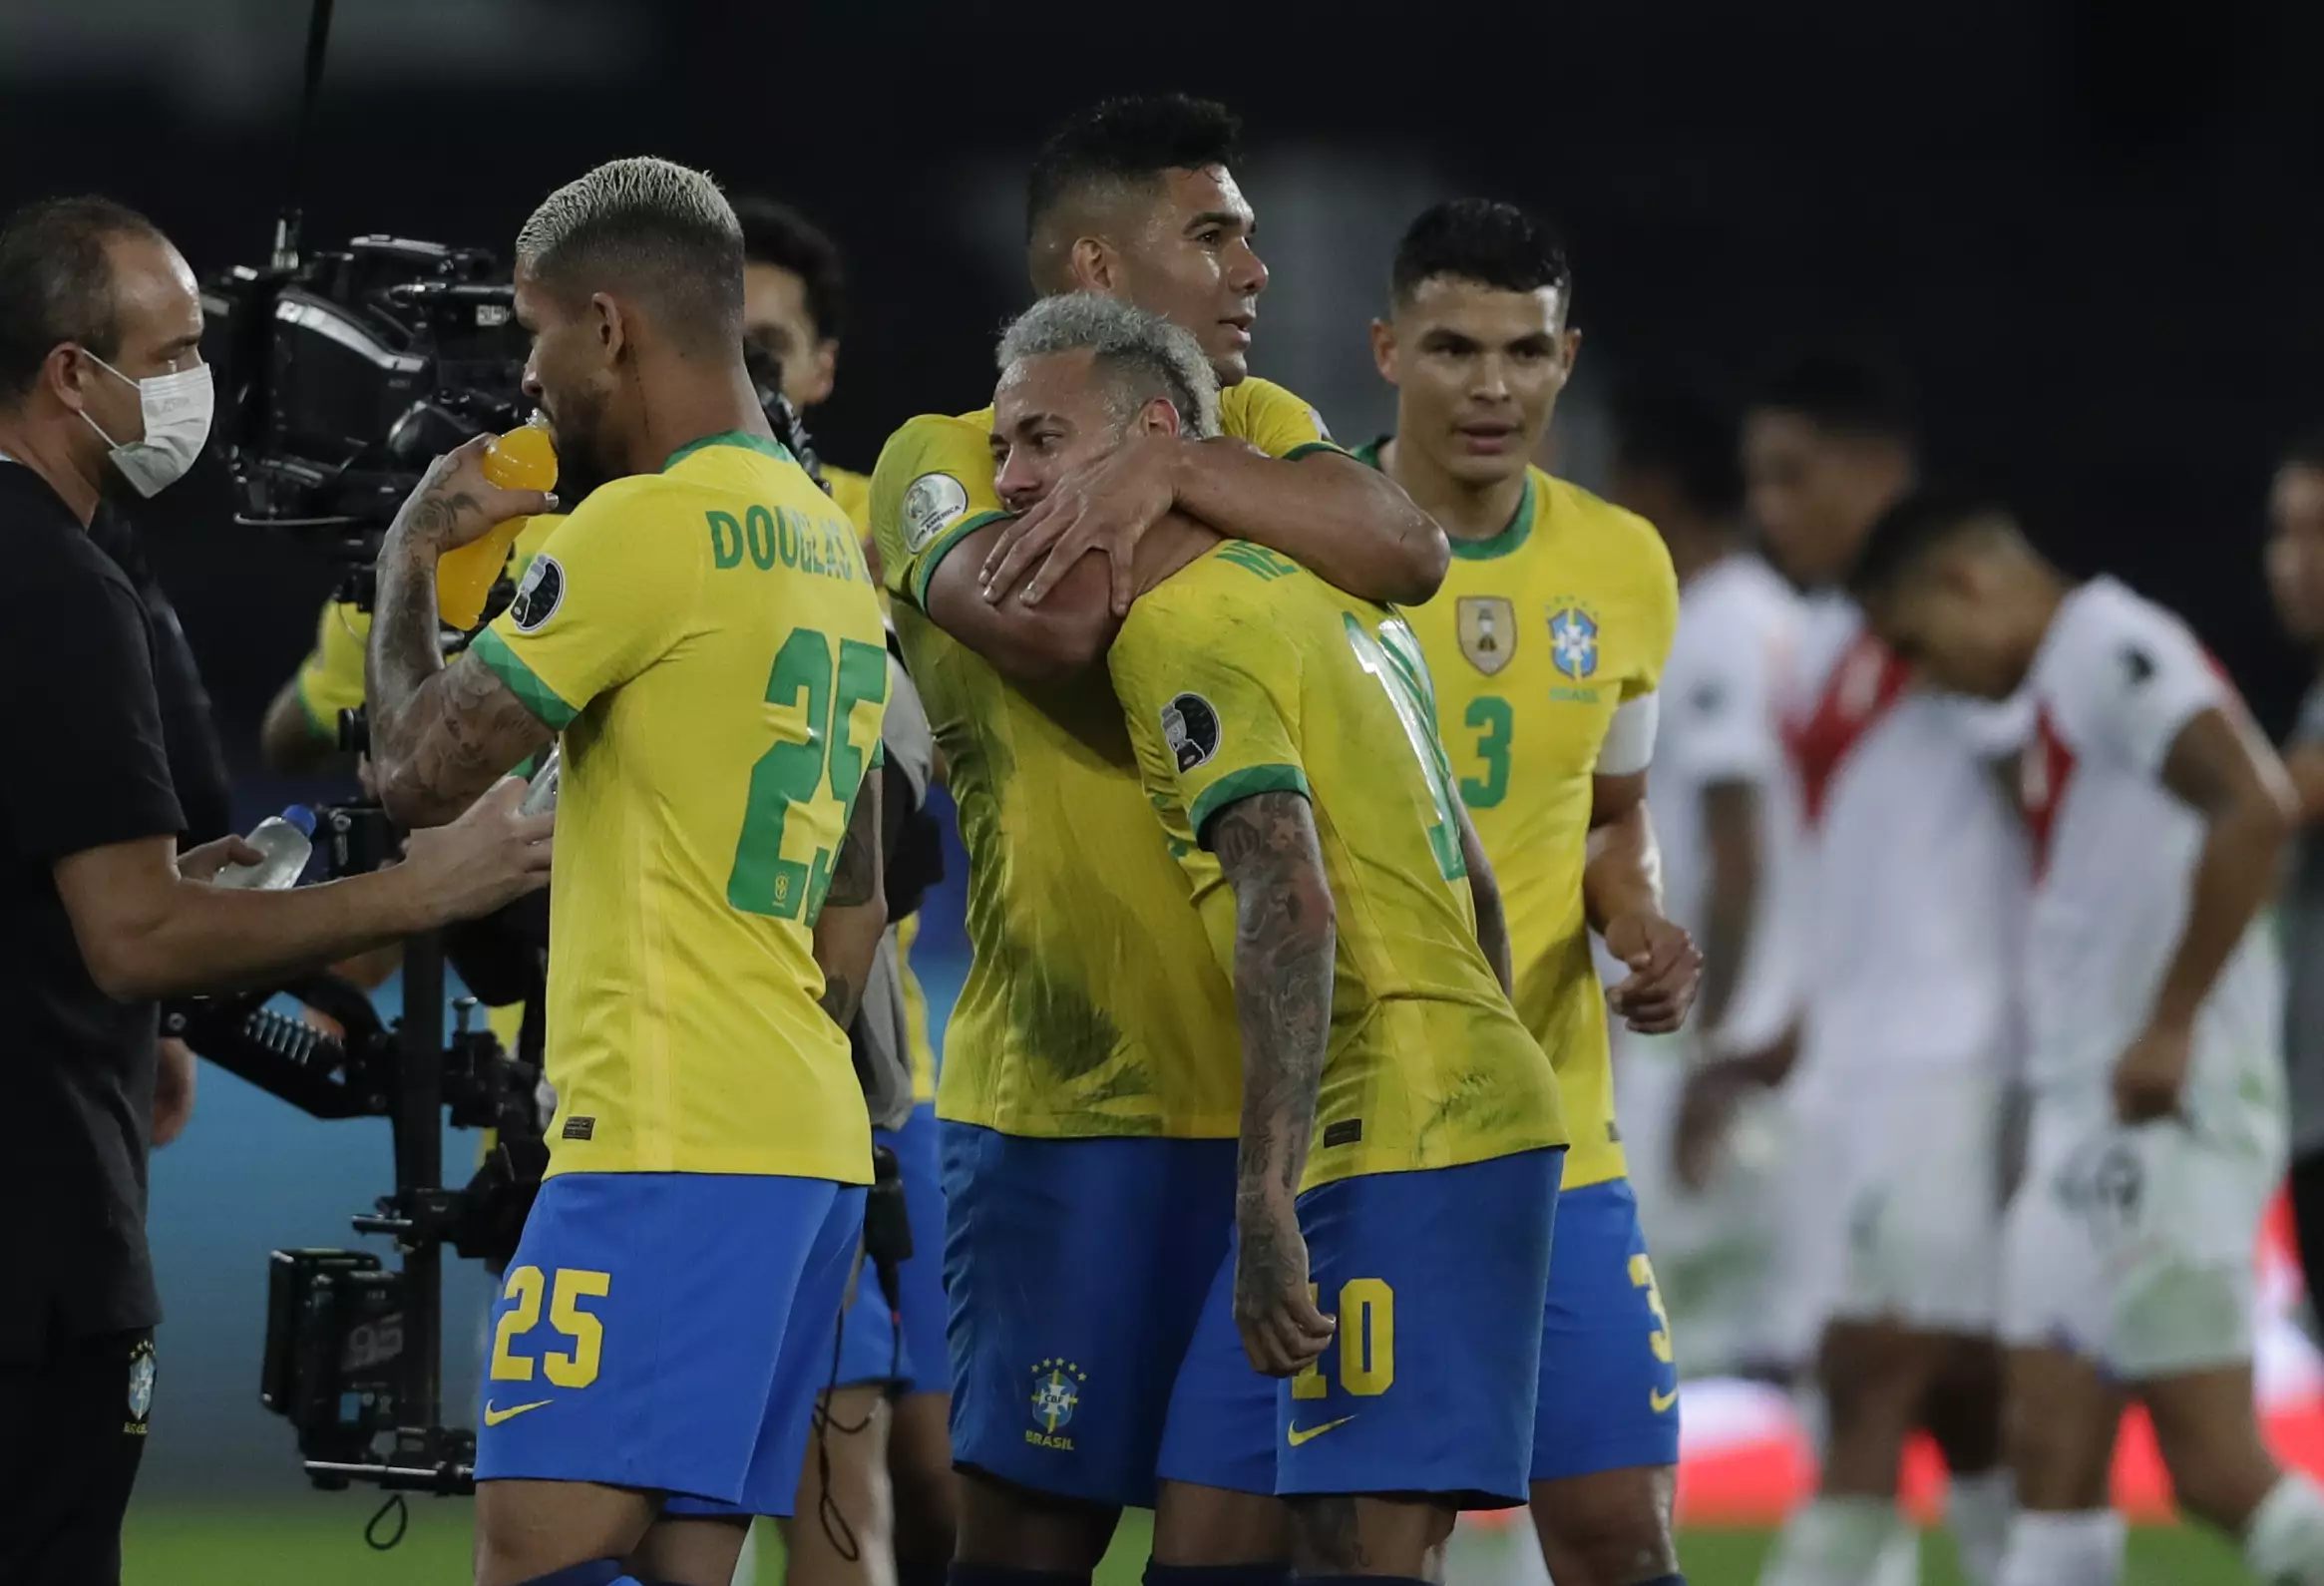 Brazil celebrate at full time. Image: PA Images